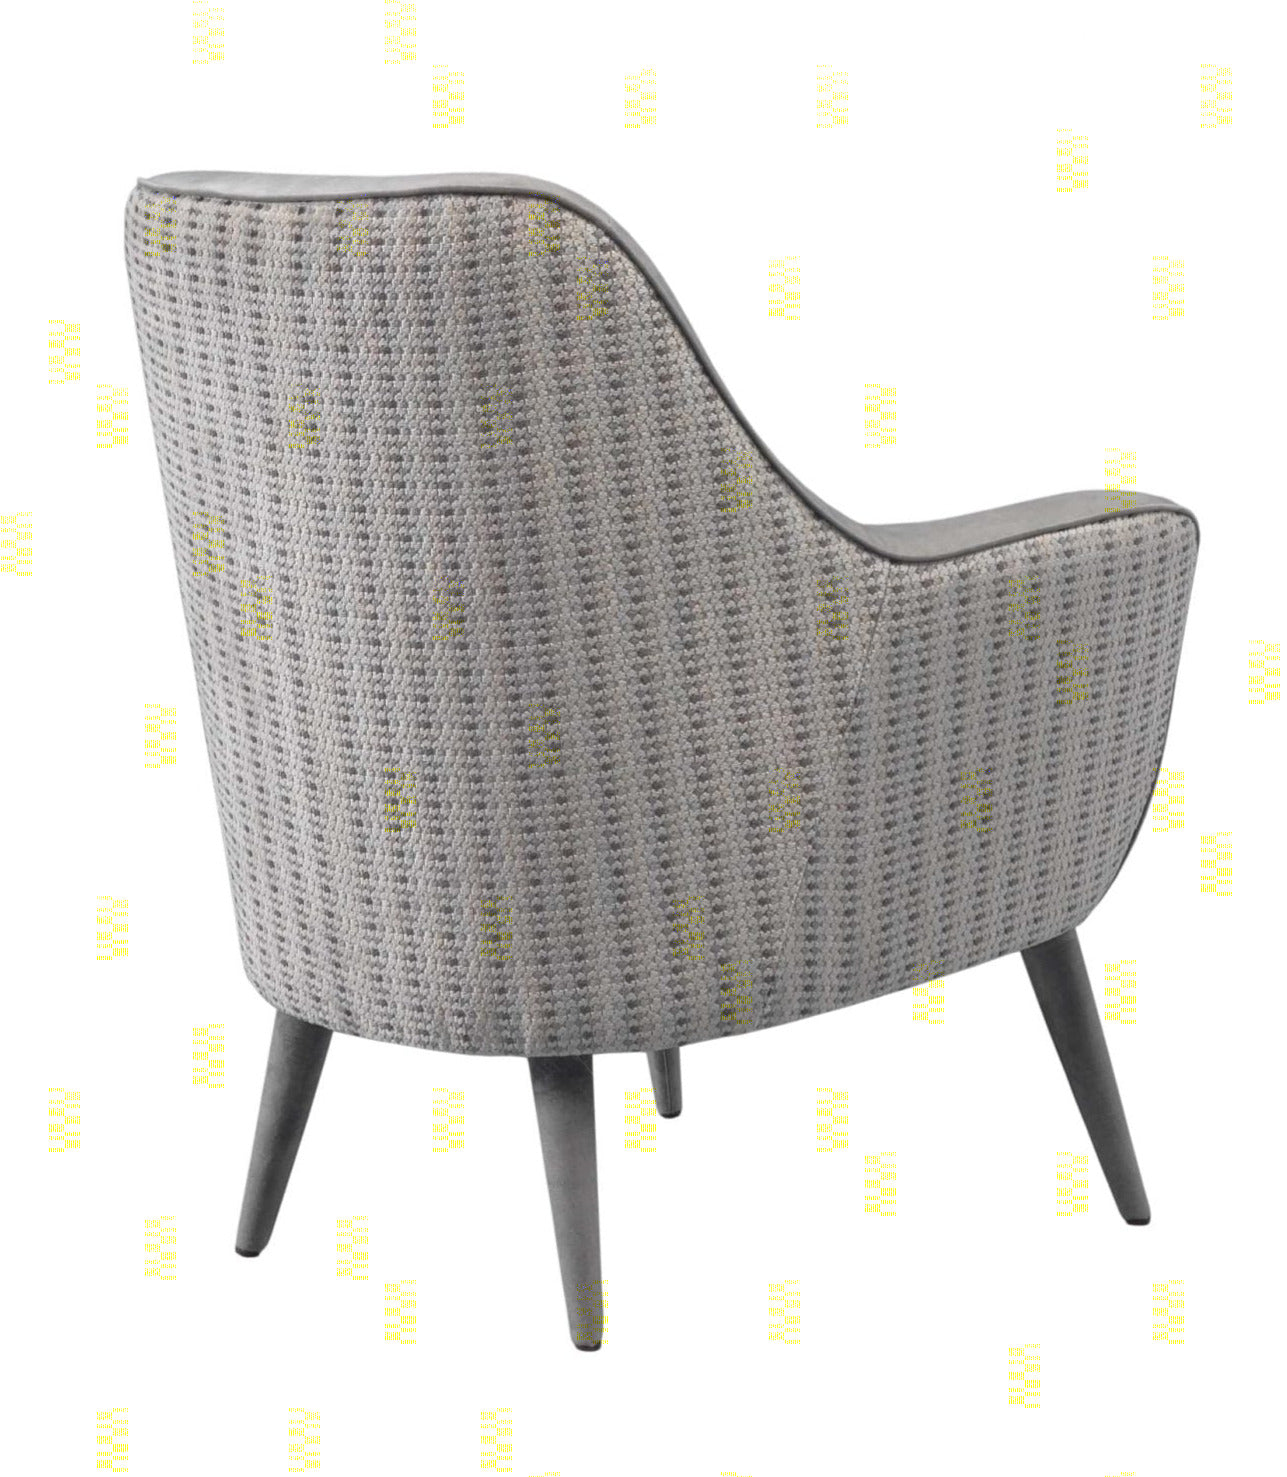 Grey fabric armchair with wooden legs